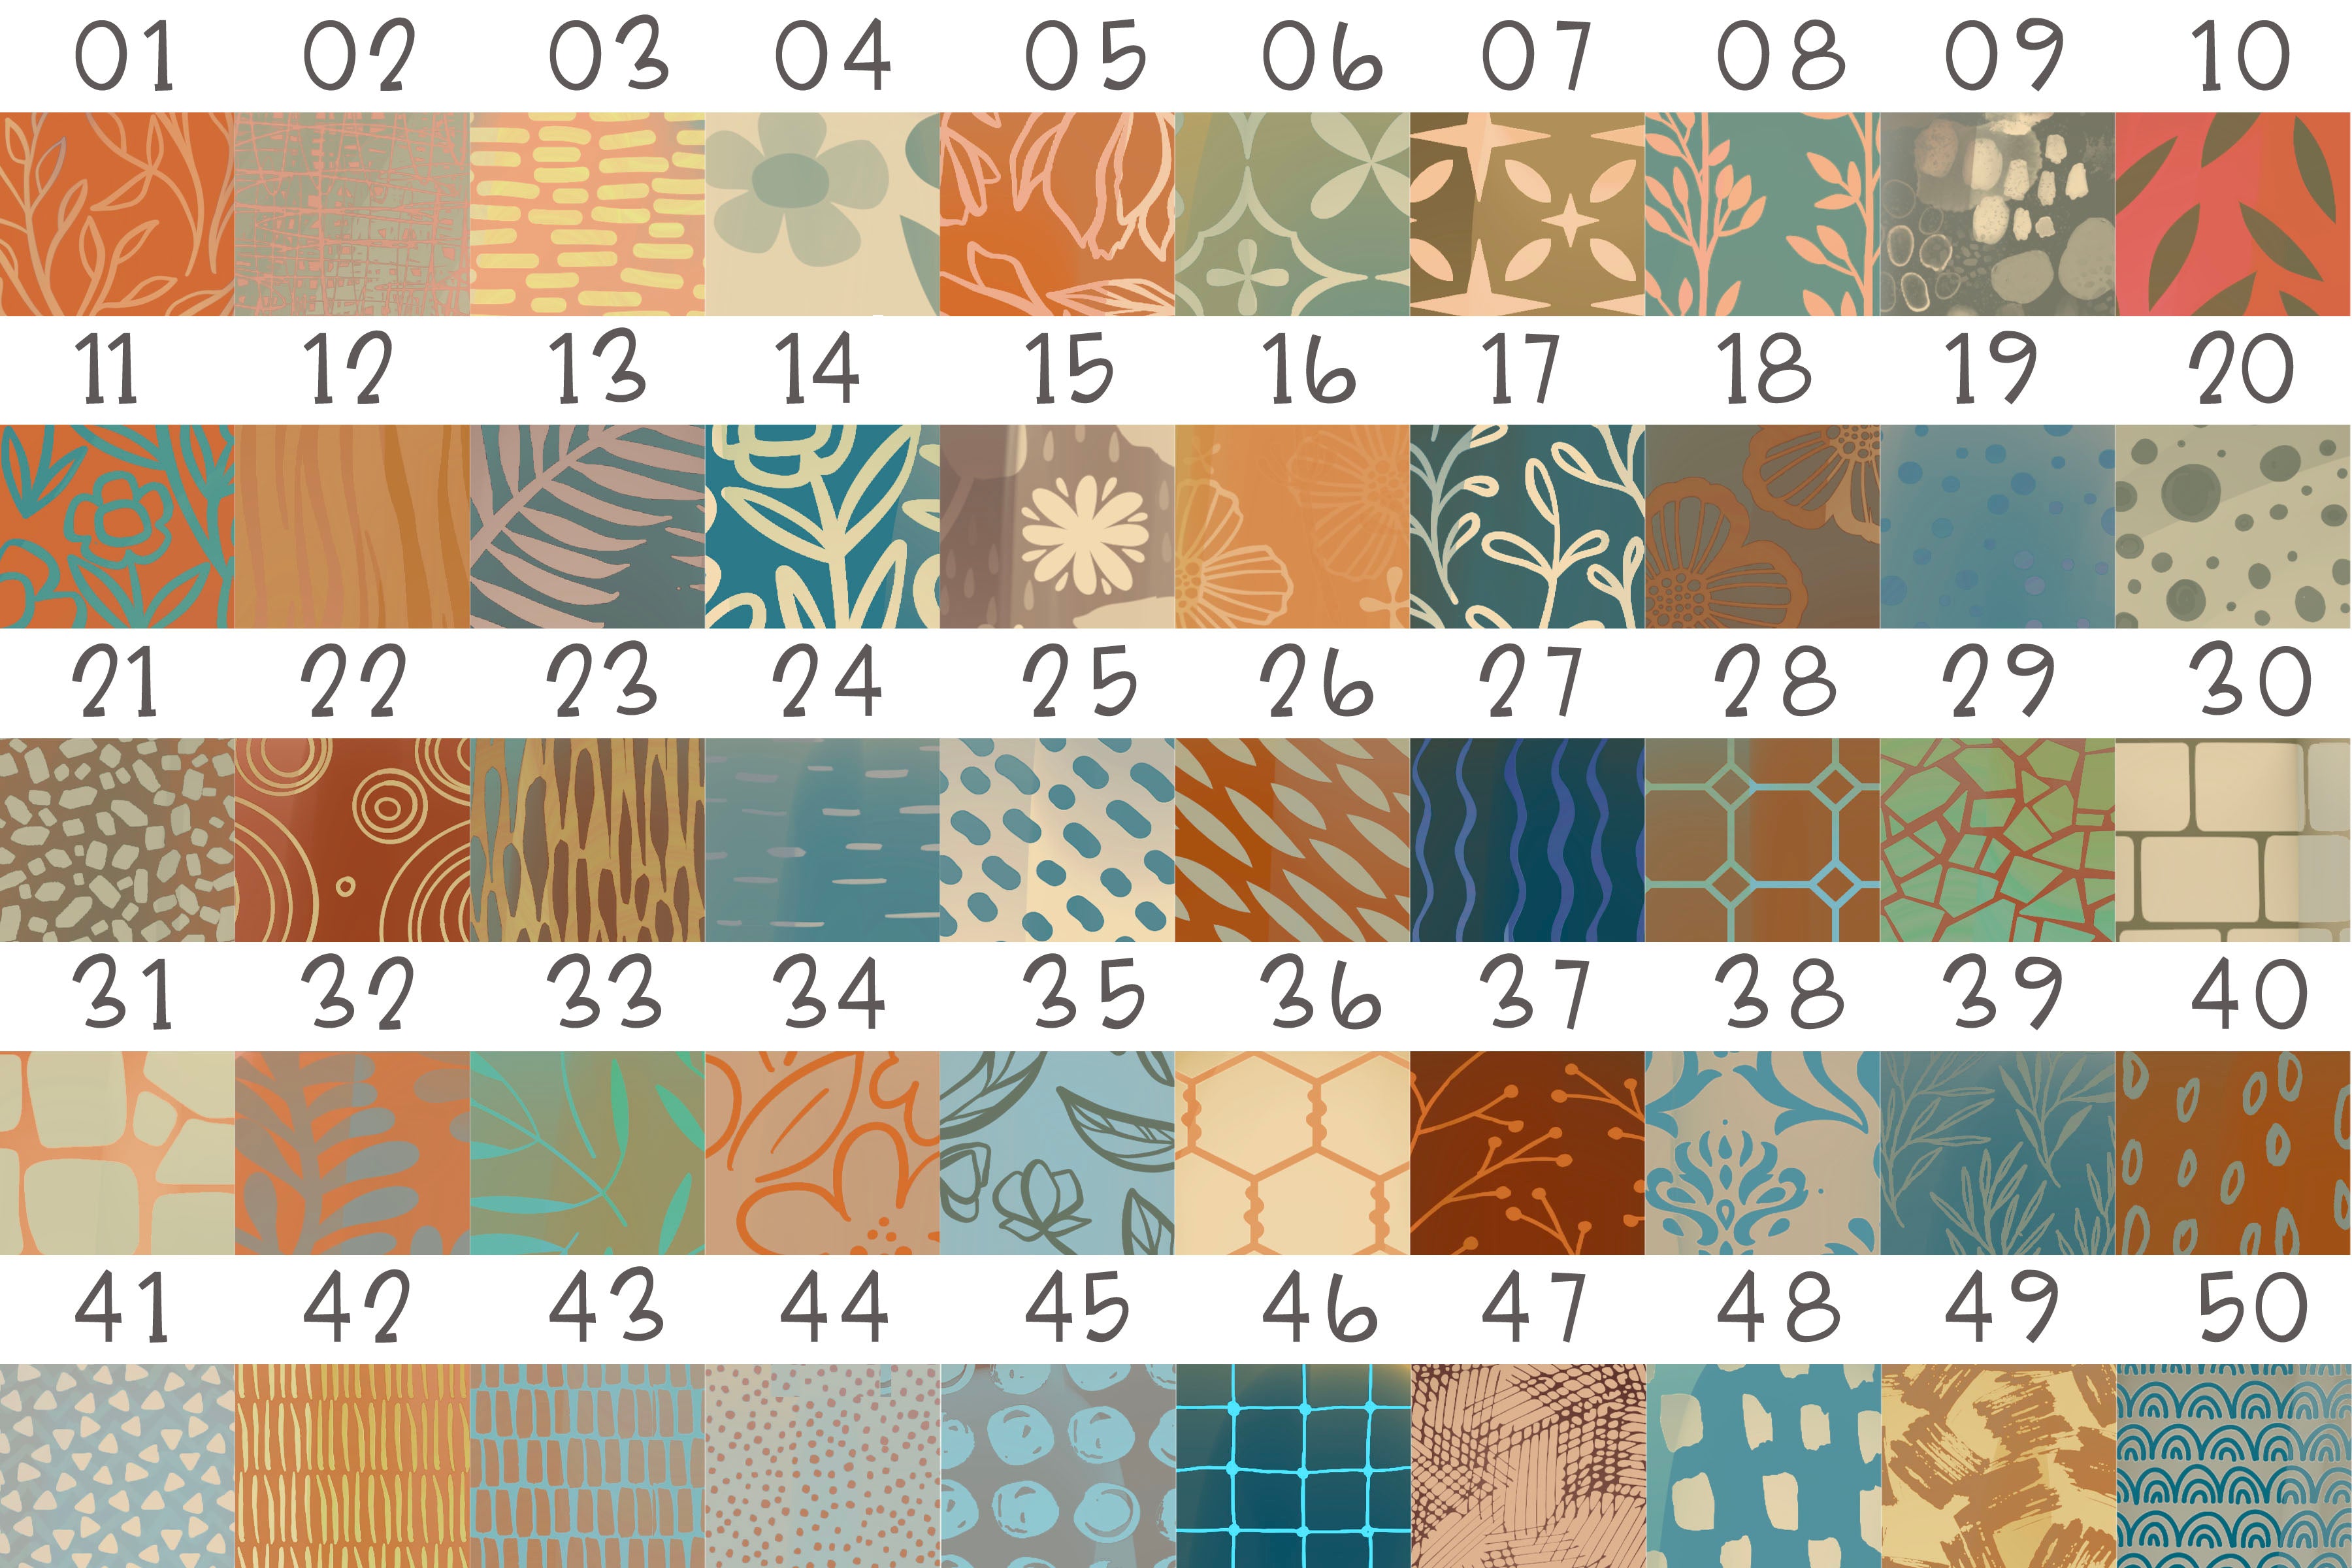 Volume 074 - Two Color Pattern Brushes and Washi Tapes